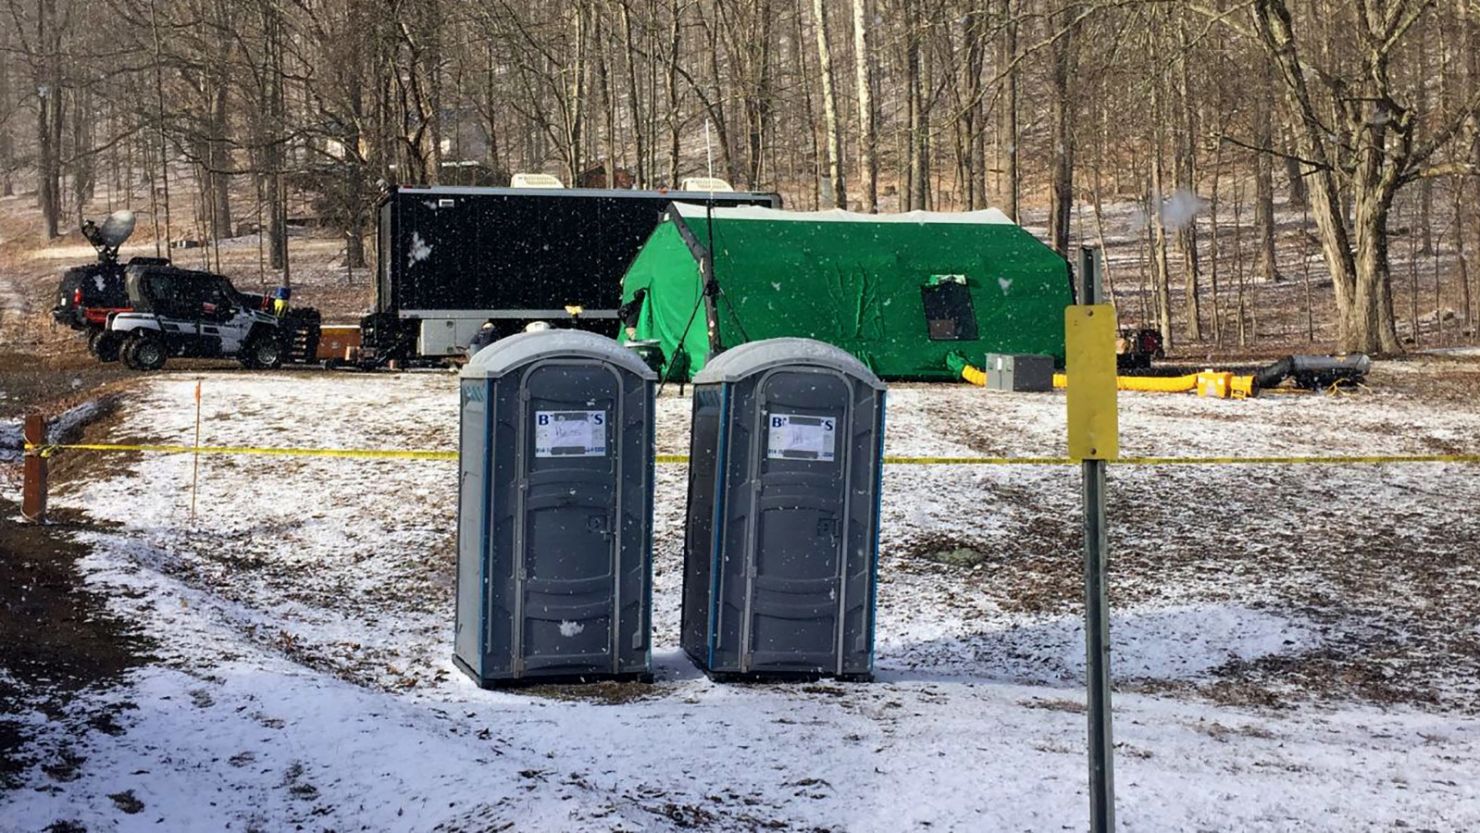 FBI agents and state conservation officers set up a base last Tuesday in Benezette Township, Pennsylvania, near a site where treasure hunters say Civil War-era gold is buried. 